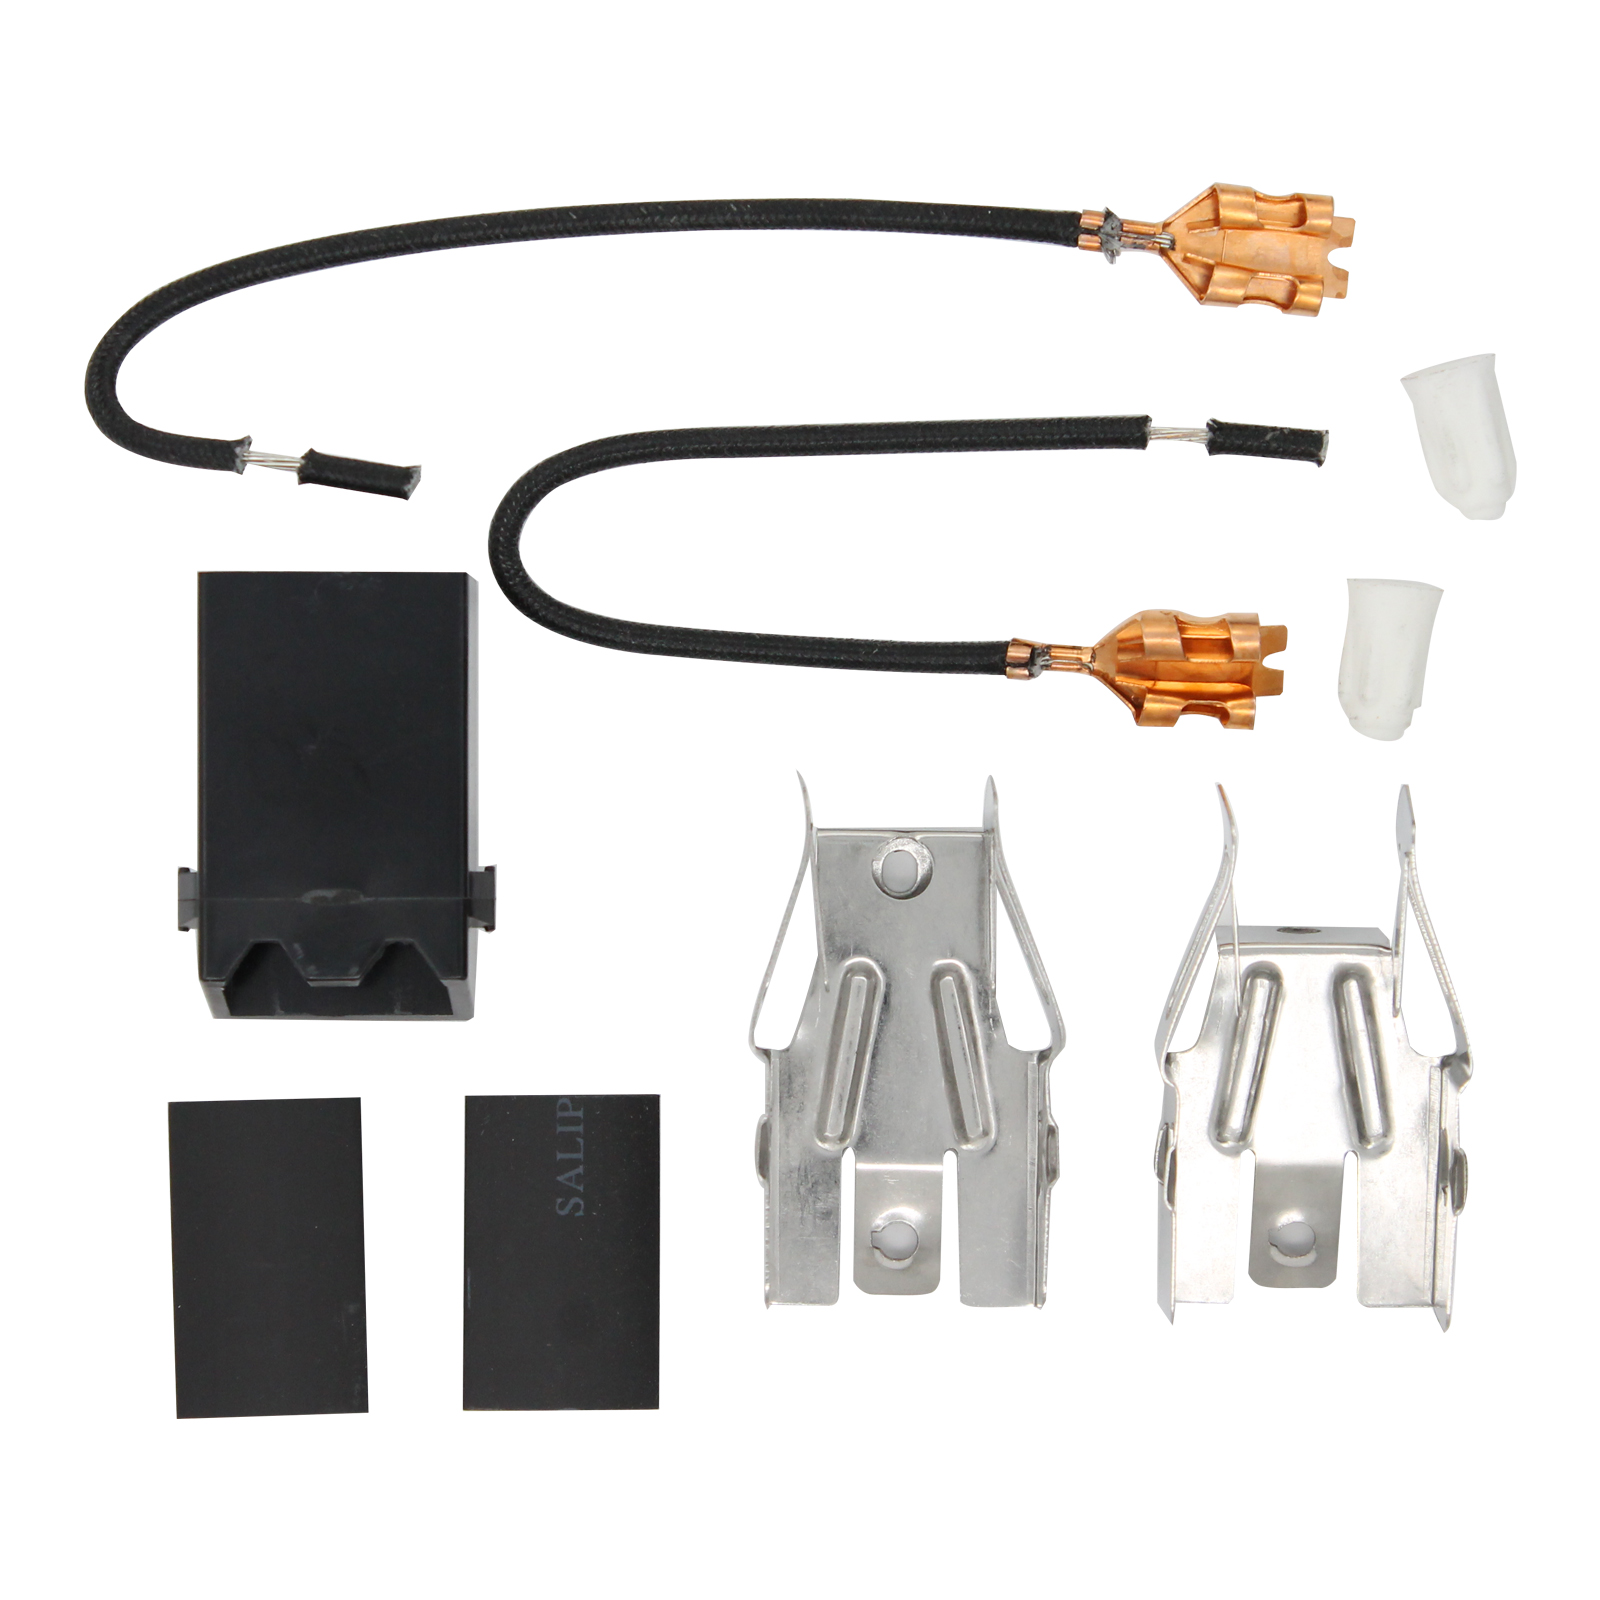 330031 Top Burner Receptacle Kit Replacement for Amana 631.003 Range/Cooktop/Oven - Compatible with 330031 Range Burner Receptacle Kit - UpStart Components Brand - image 4 of 4